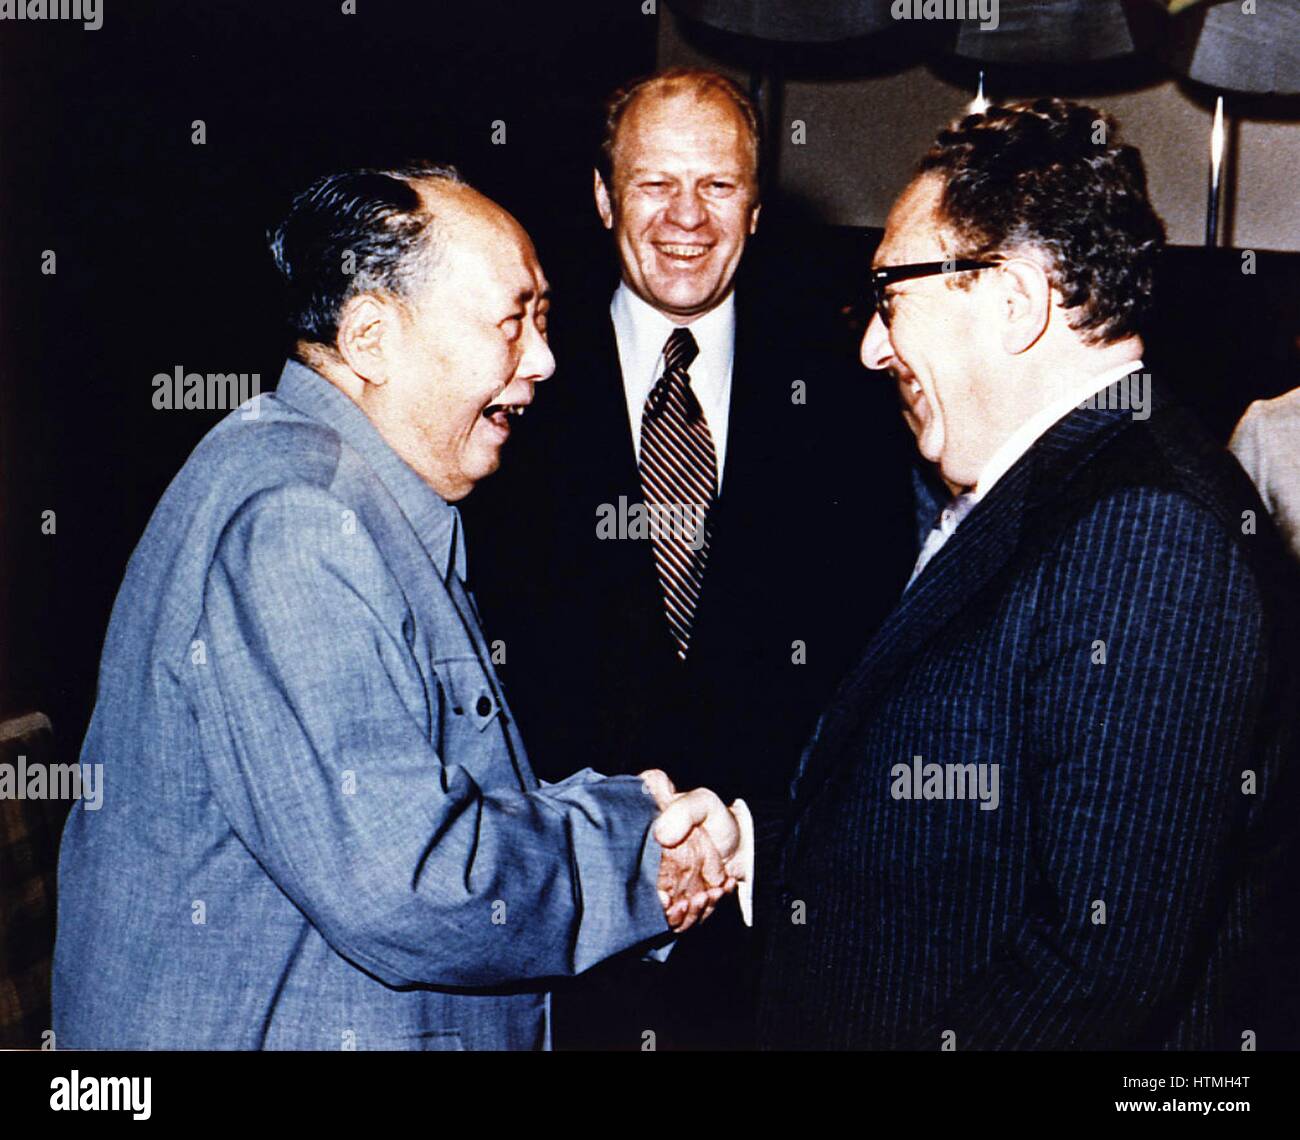 Copy of President Ford Secretary of State Henry Kissinger with Mao Tse-Tung; Chairman of Chinese Communist Party, during a visit to the Chairman’s residence Stock Photo